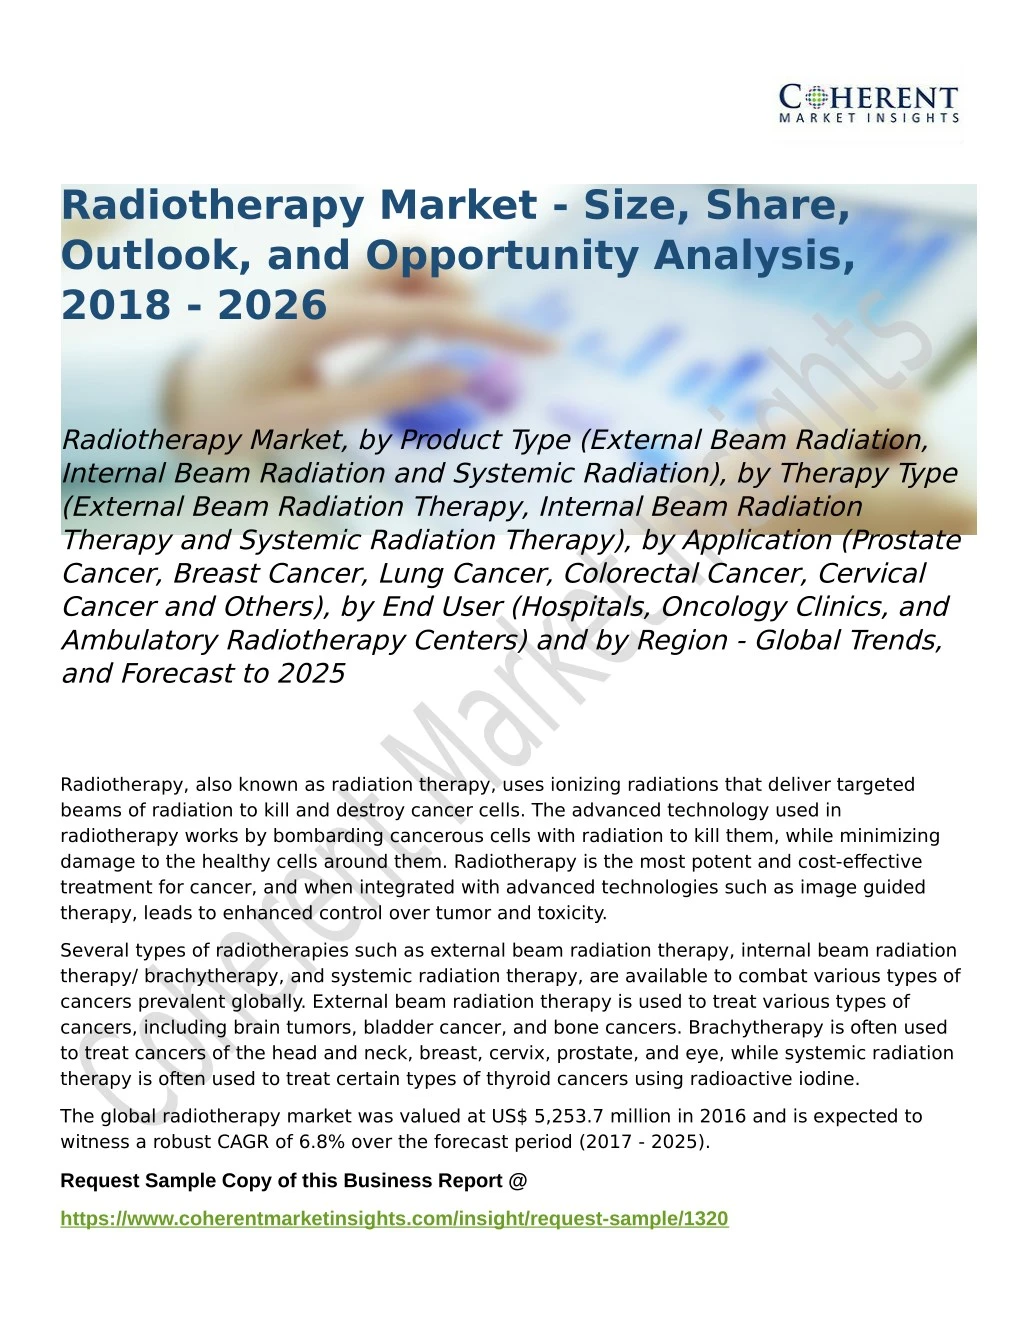 radiotherapy market size share outlook